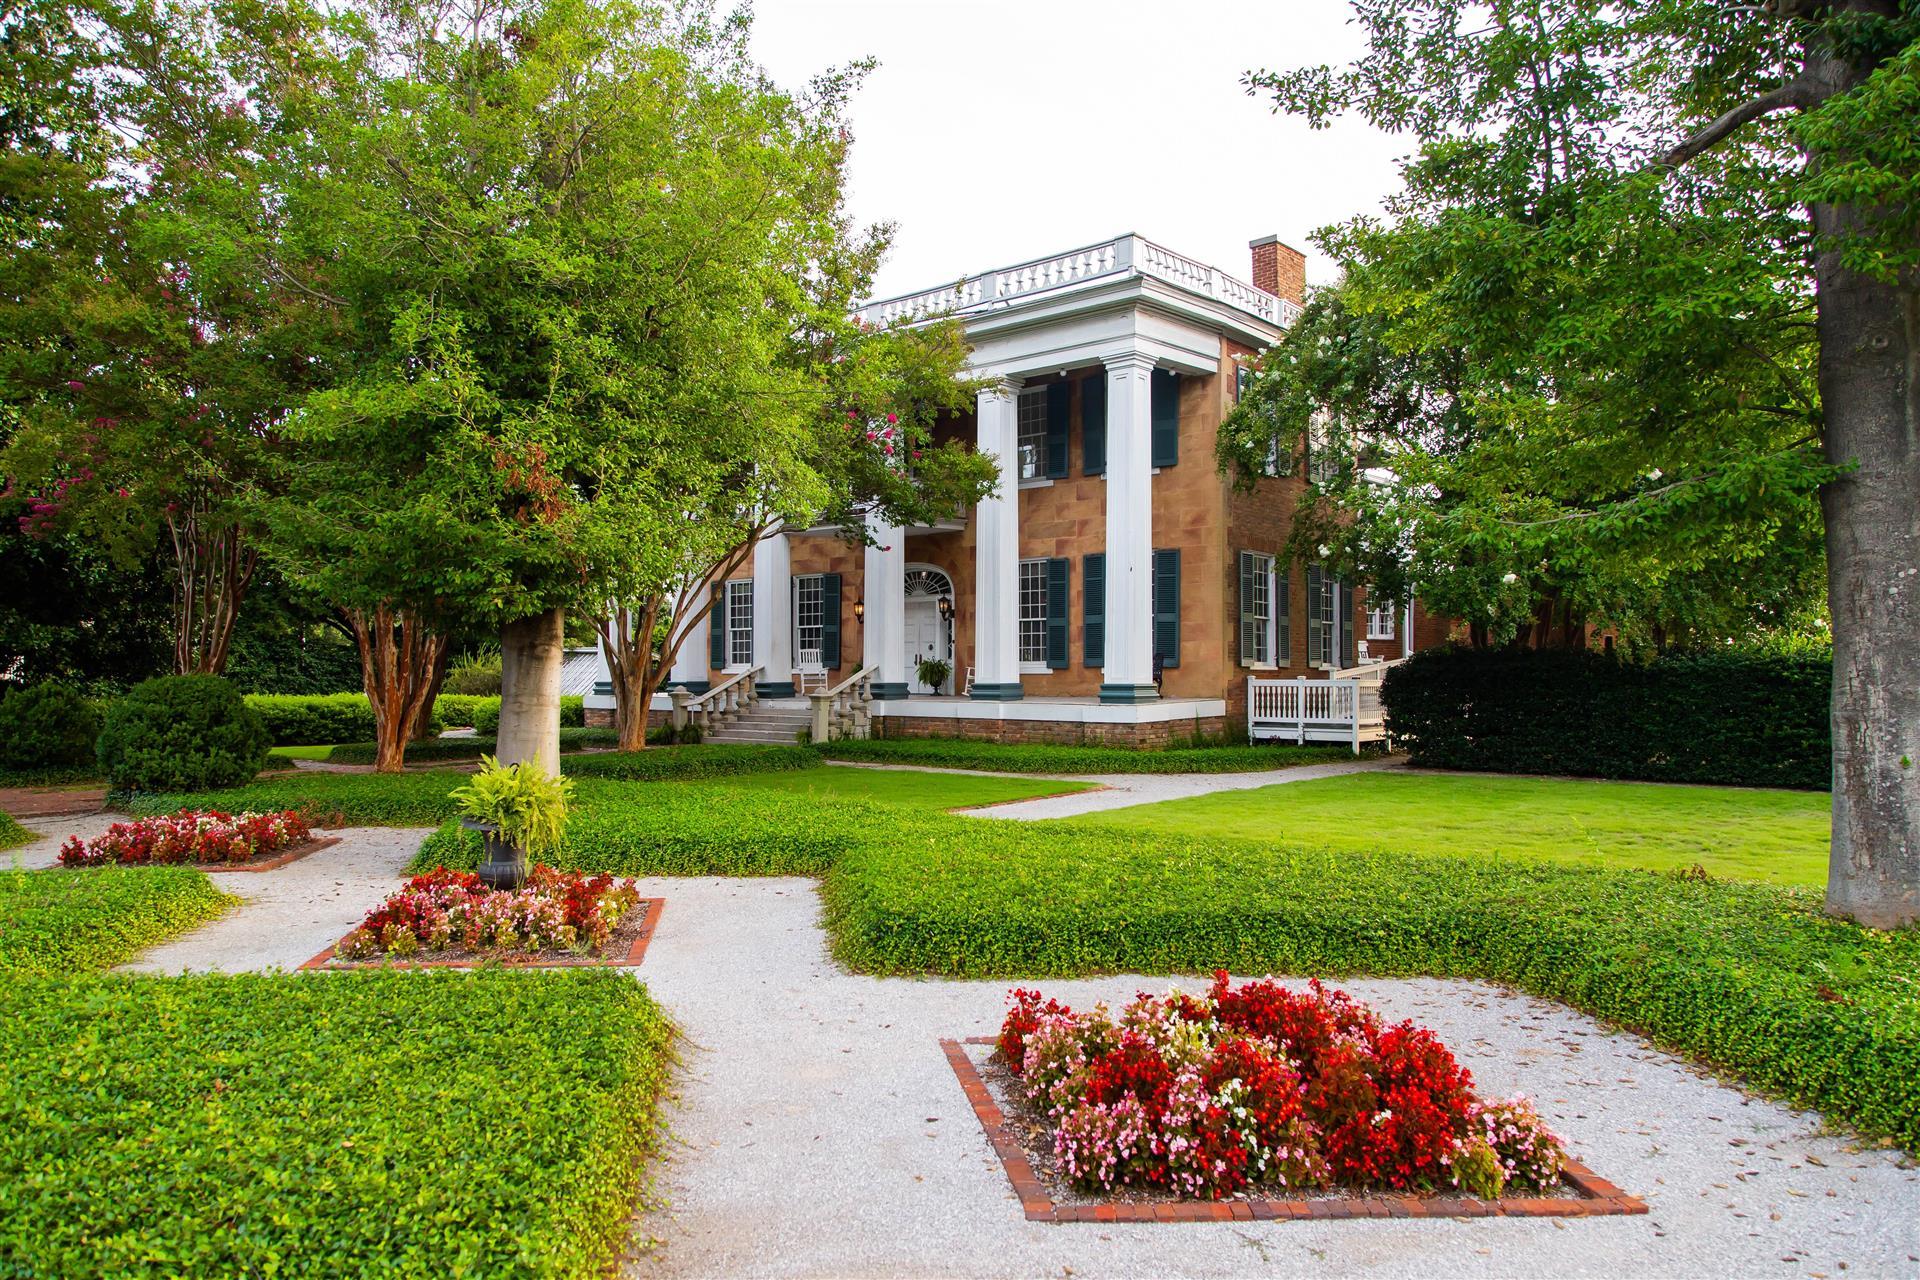 The Battle-Friedman House and Gardens in Tuscaloosa, AL